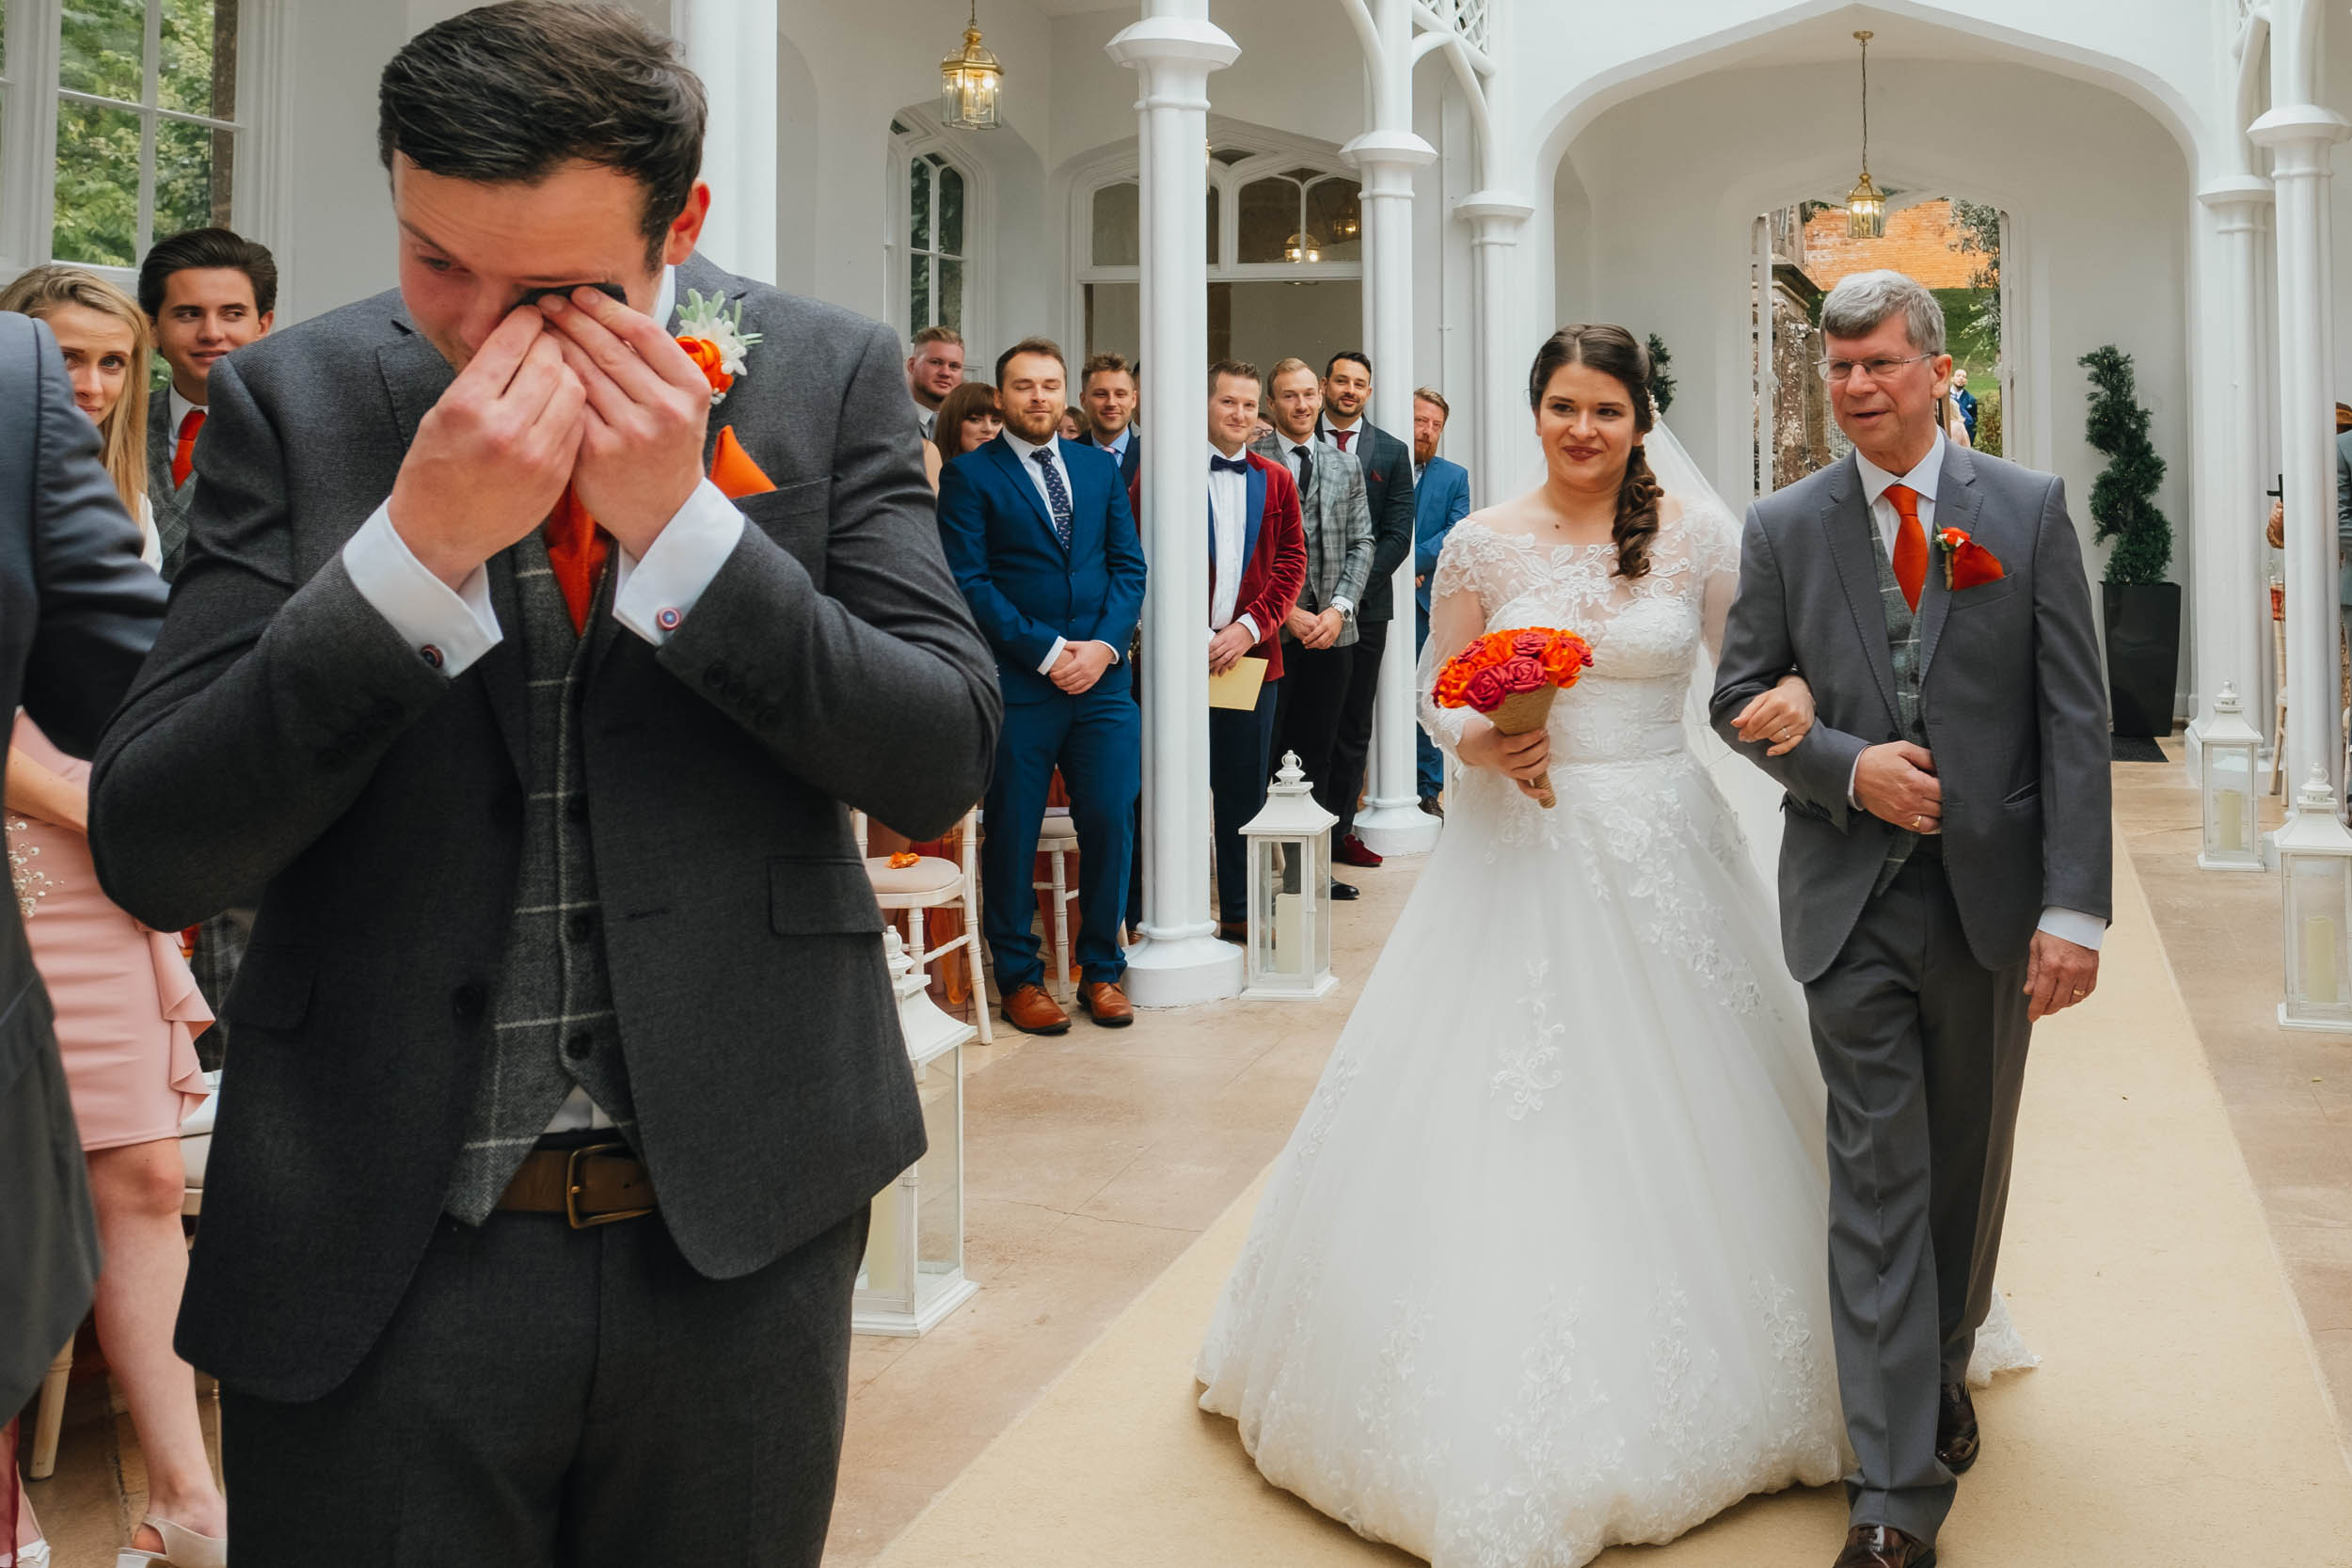 a groom wipes away a tear as the bride's father walks her down the aisle